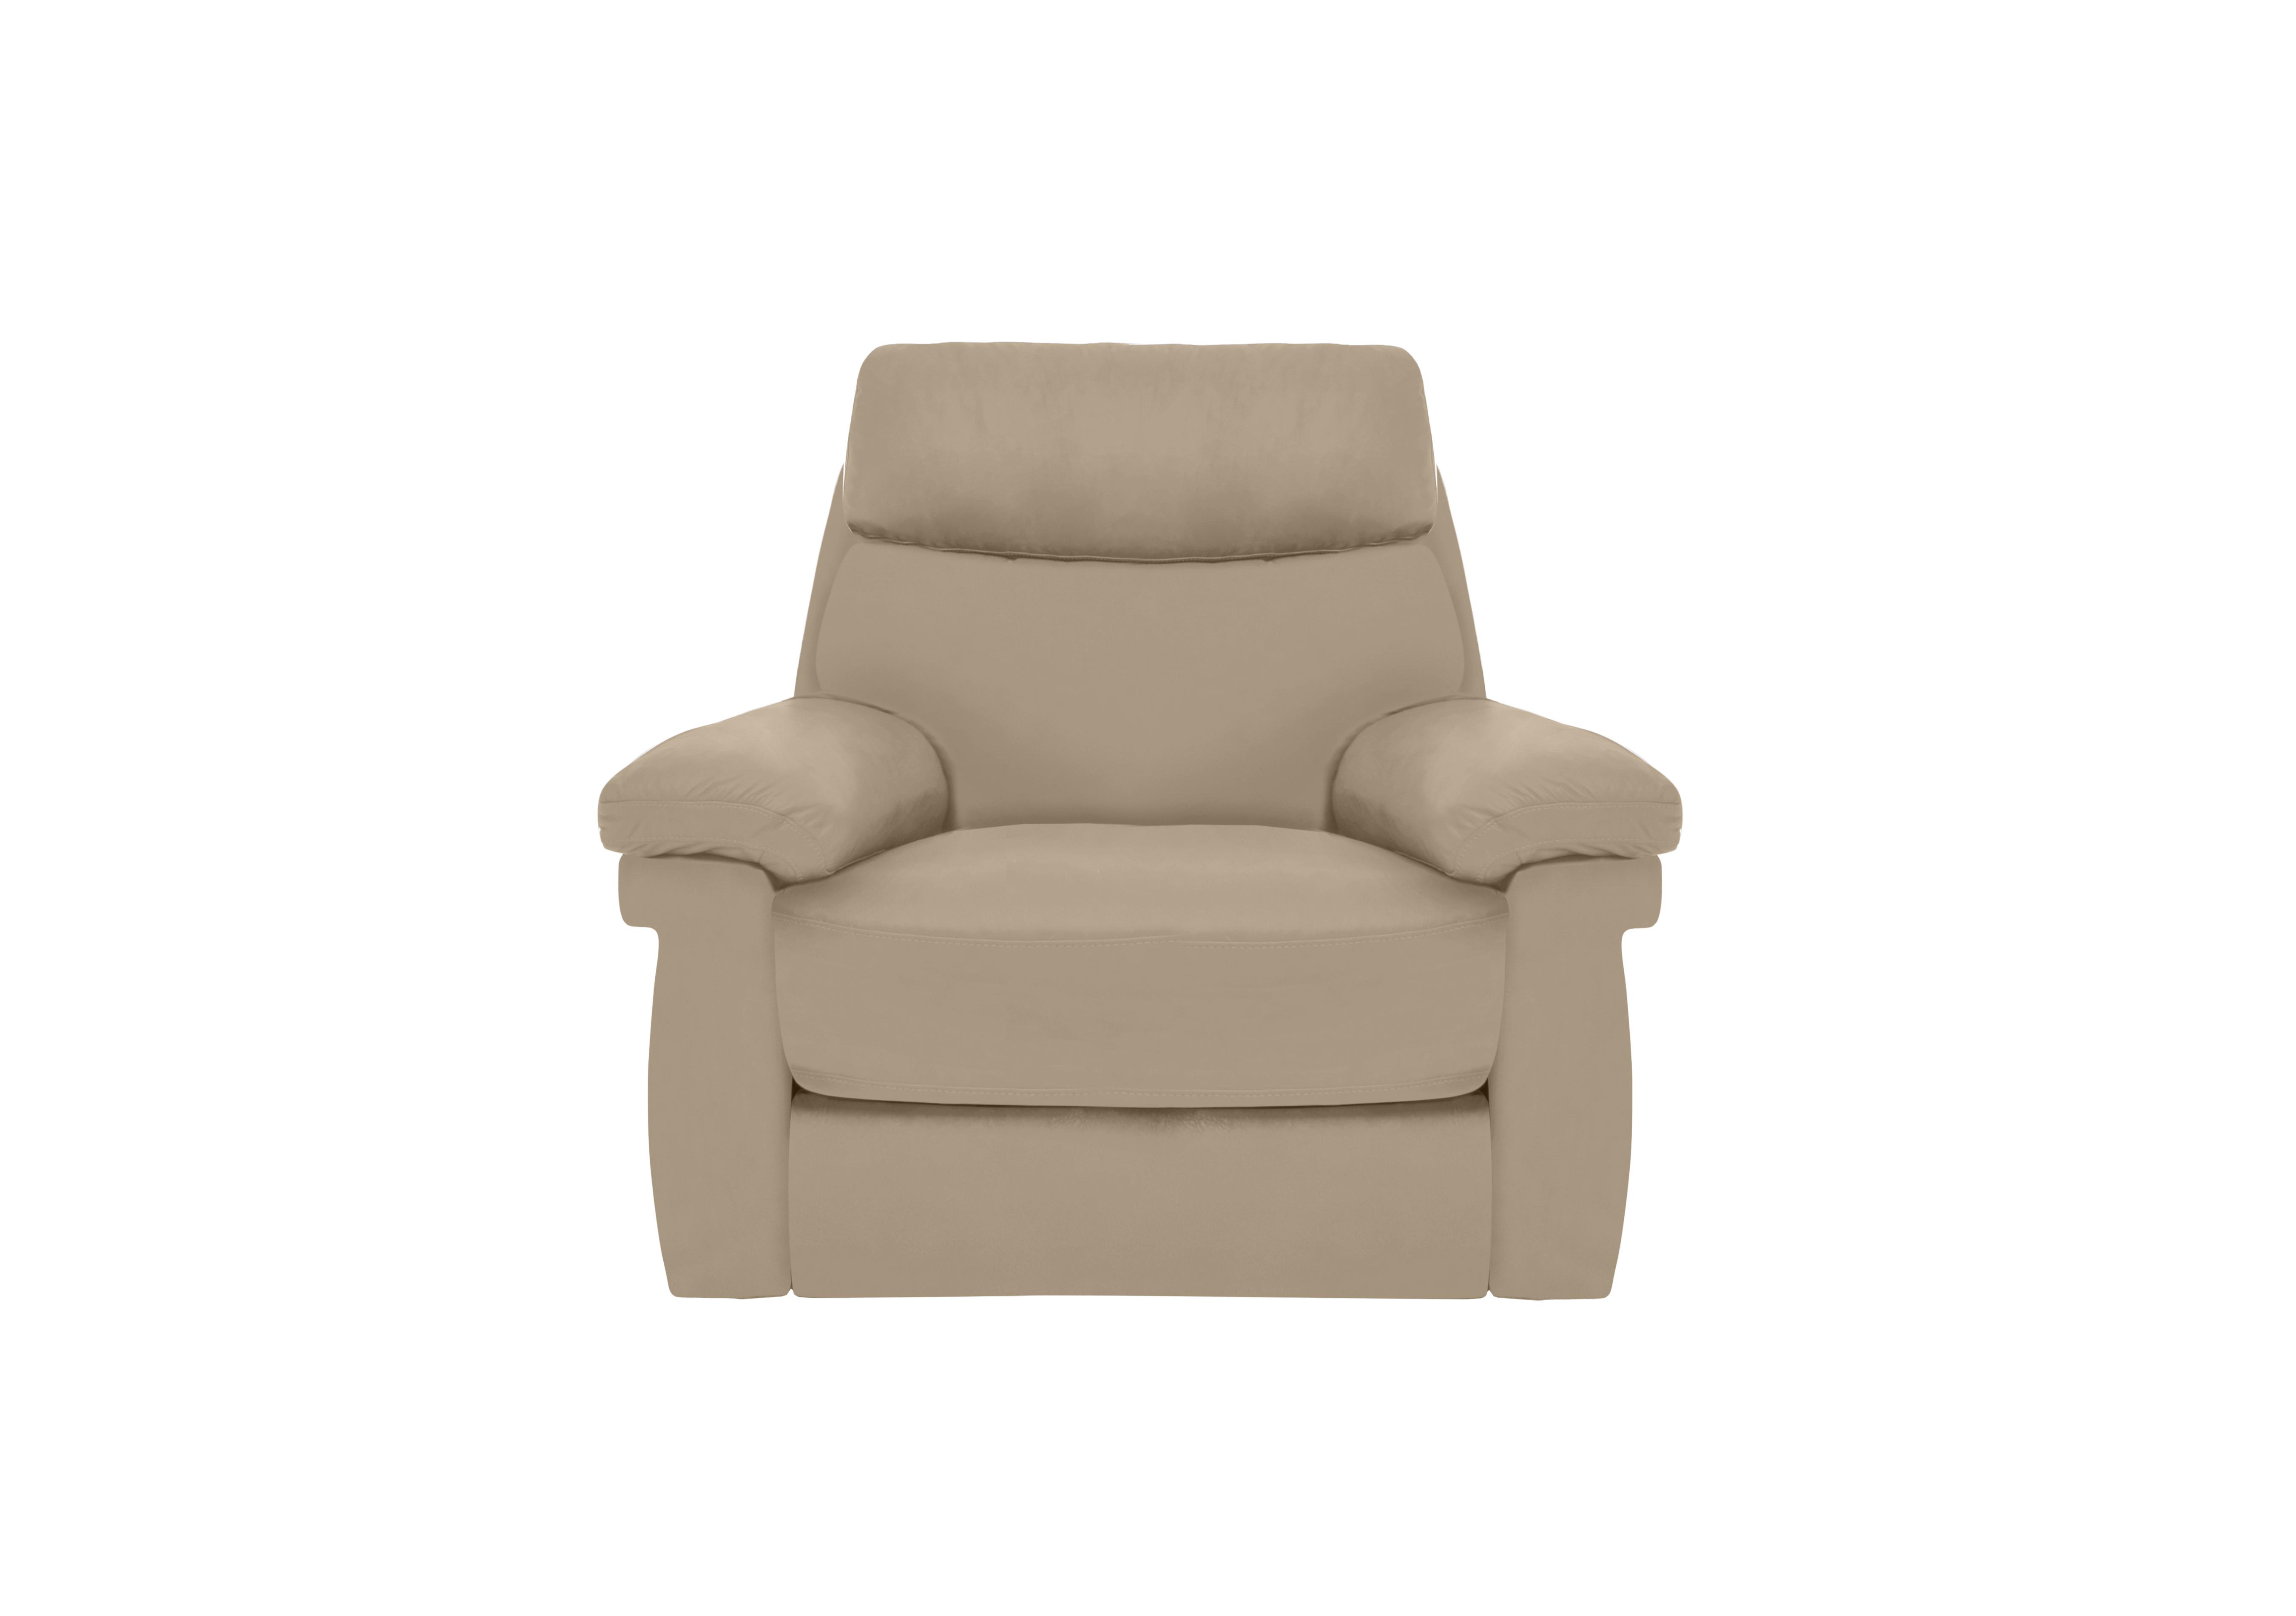 Serene Leather Power Recliner Chair with Power Headrest and Power Lumbar in Bx-039c Pebble on Furniture Village